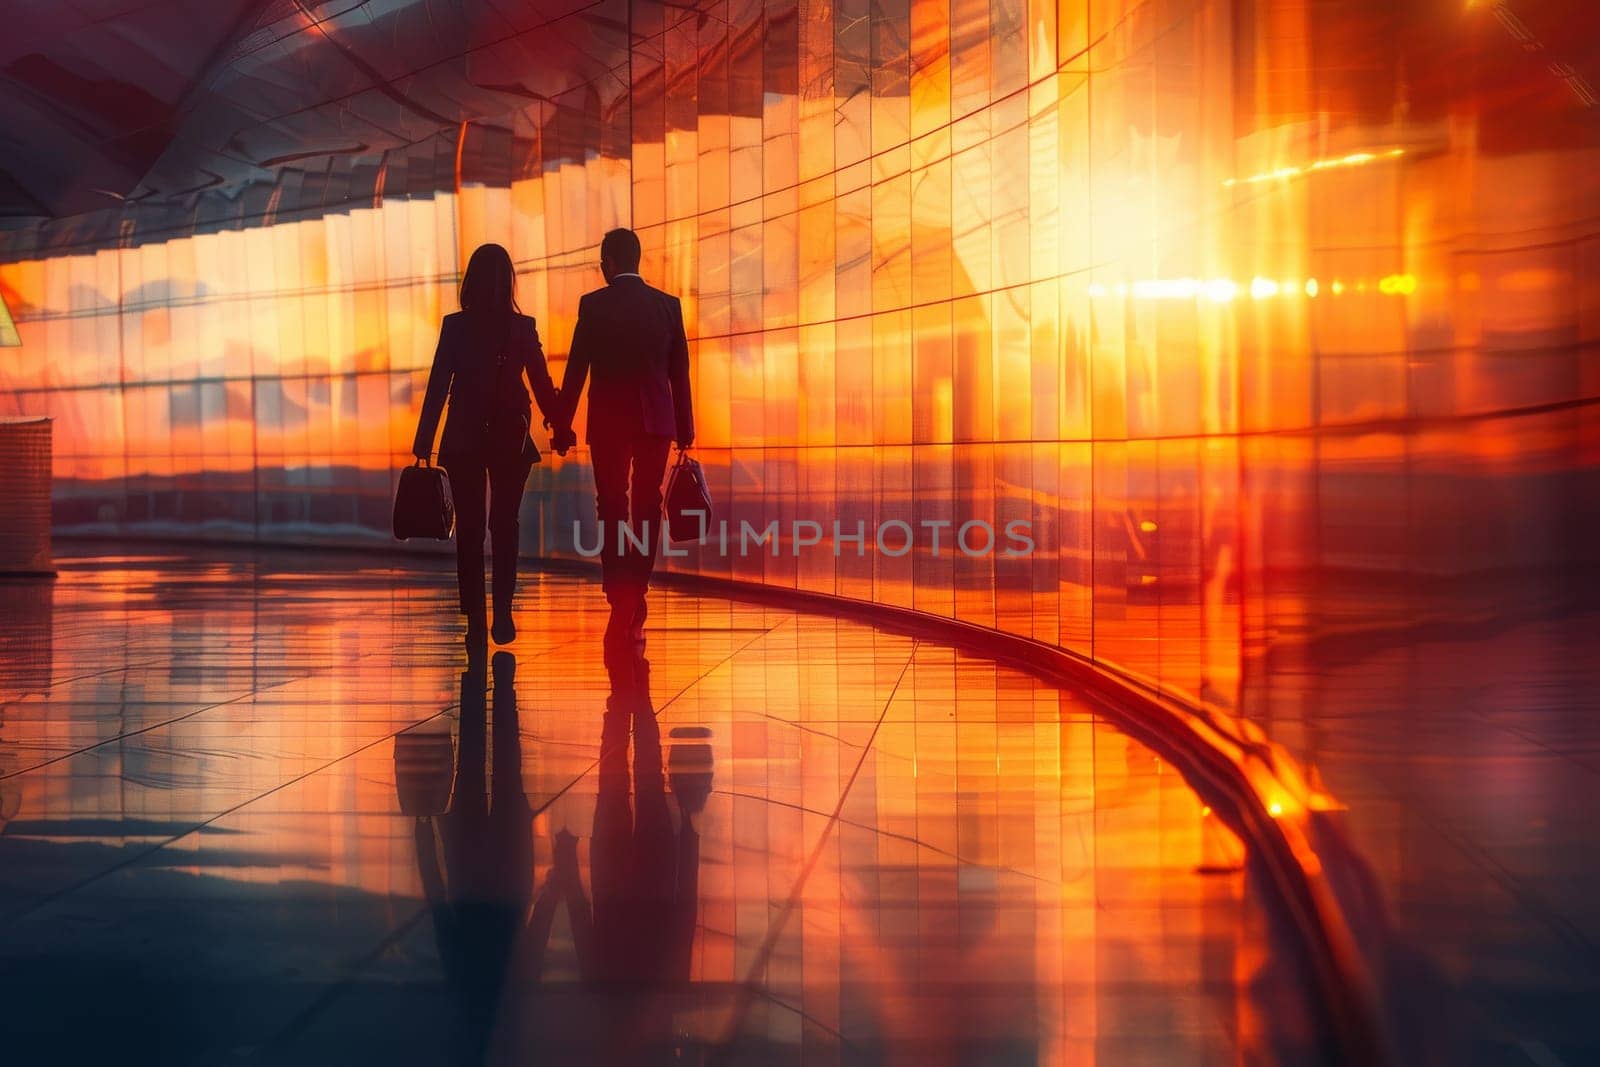 A couple walking in a building with a sunset in the background. The man is carrying a briefcase and the woman is carrying a handbag